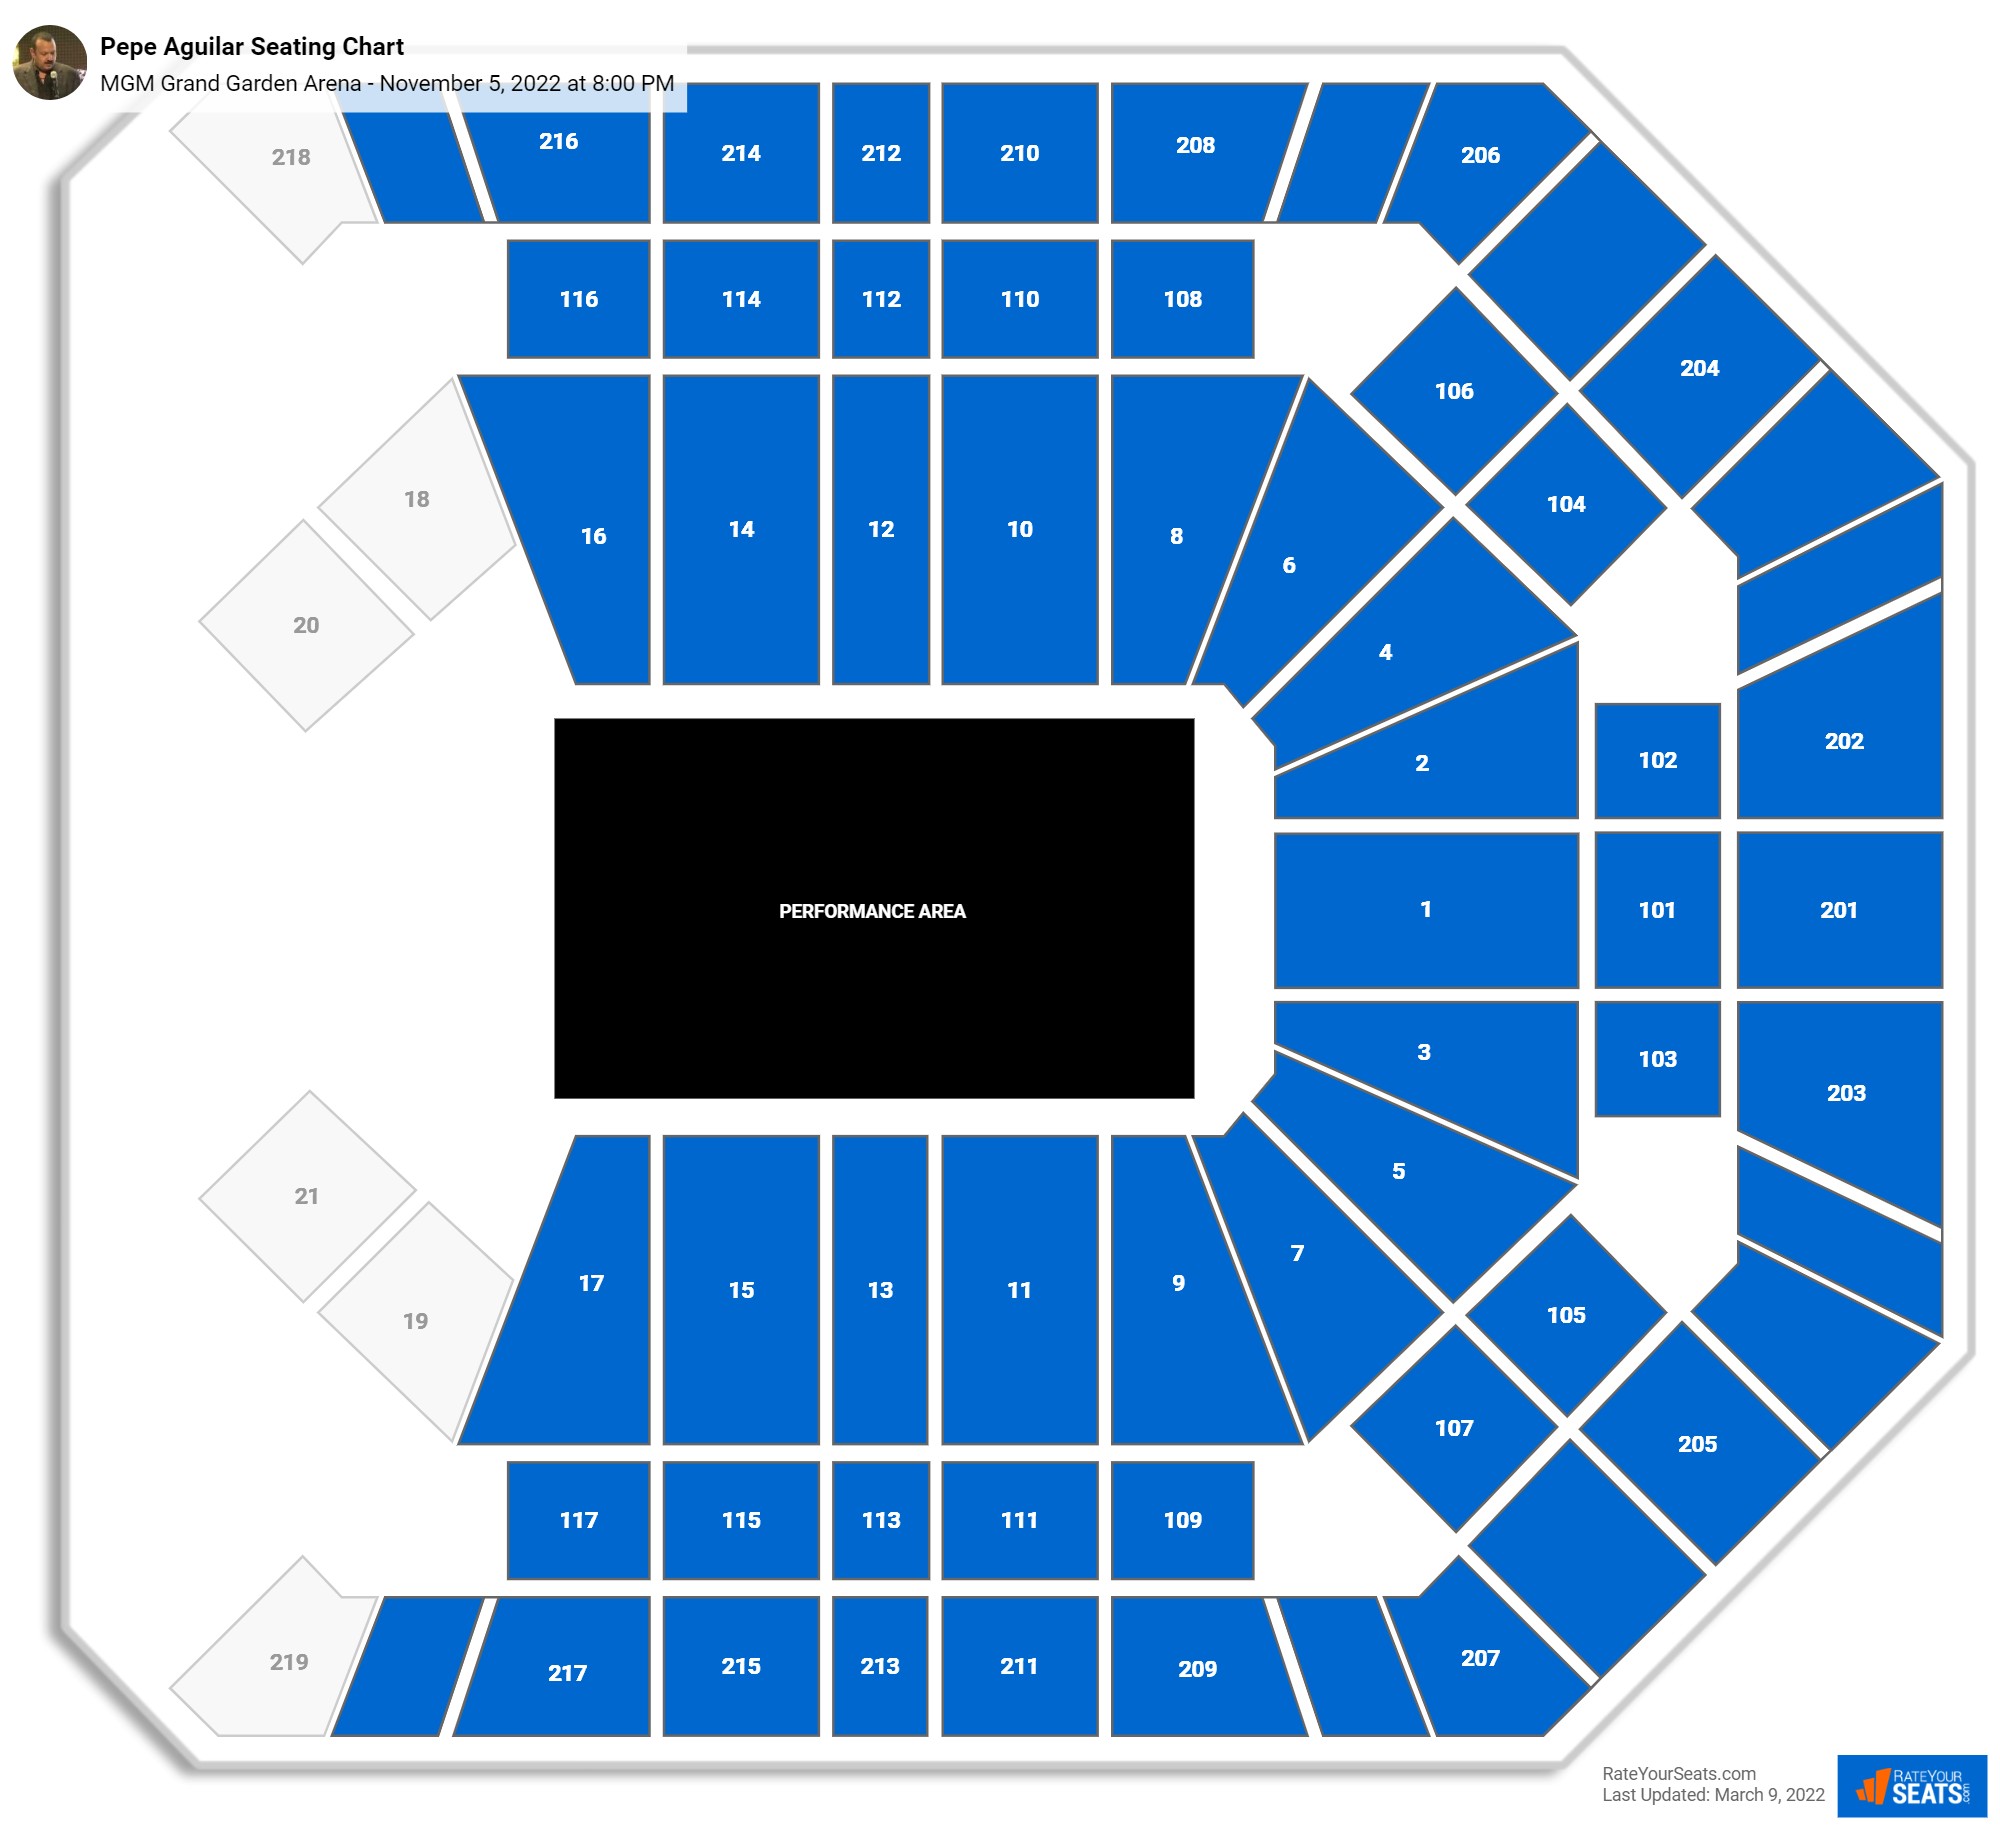 MGM Grand Garden Arena Seating Chart - RateYourSeats.com